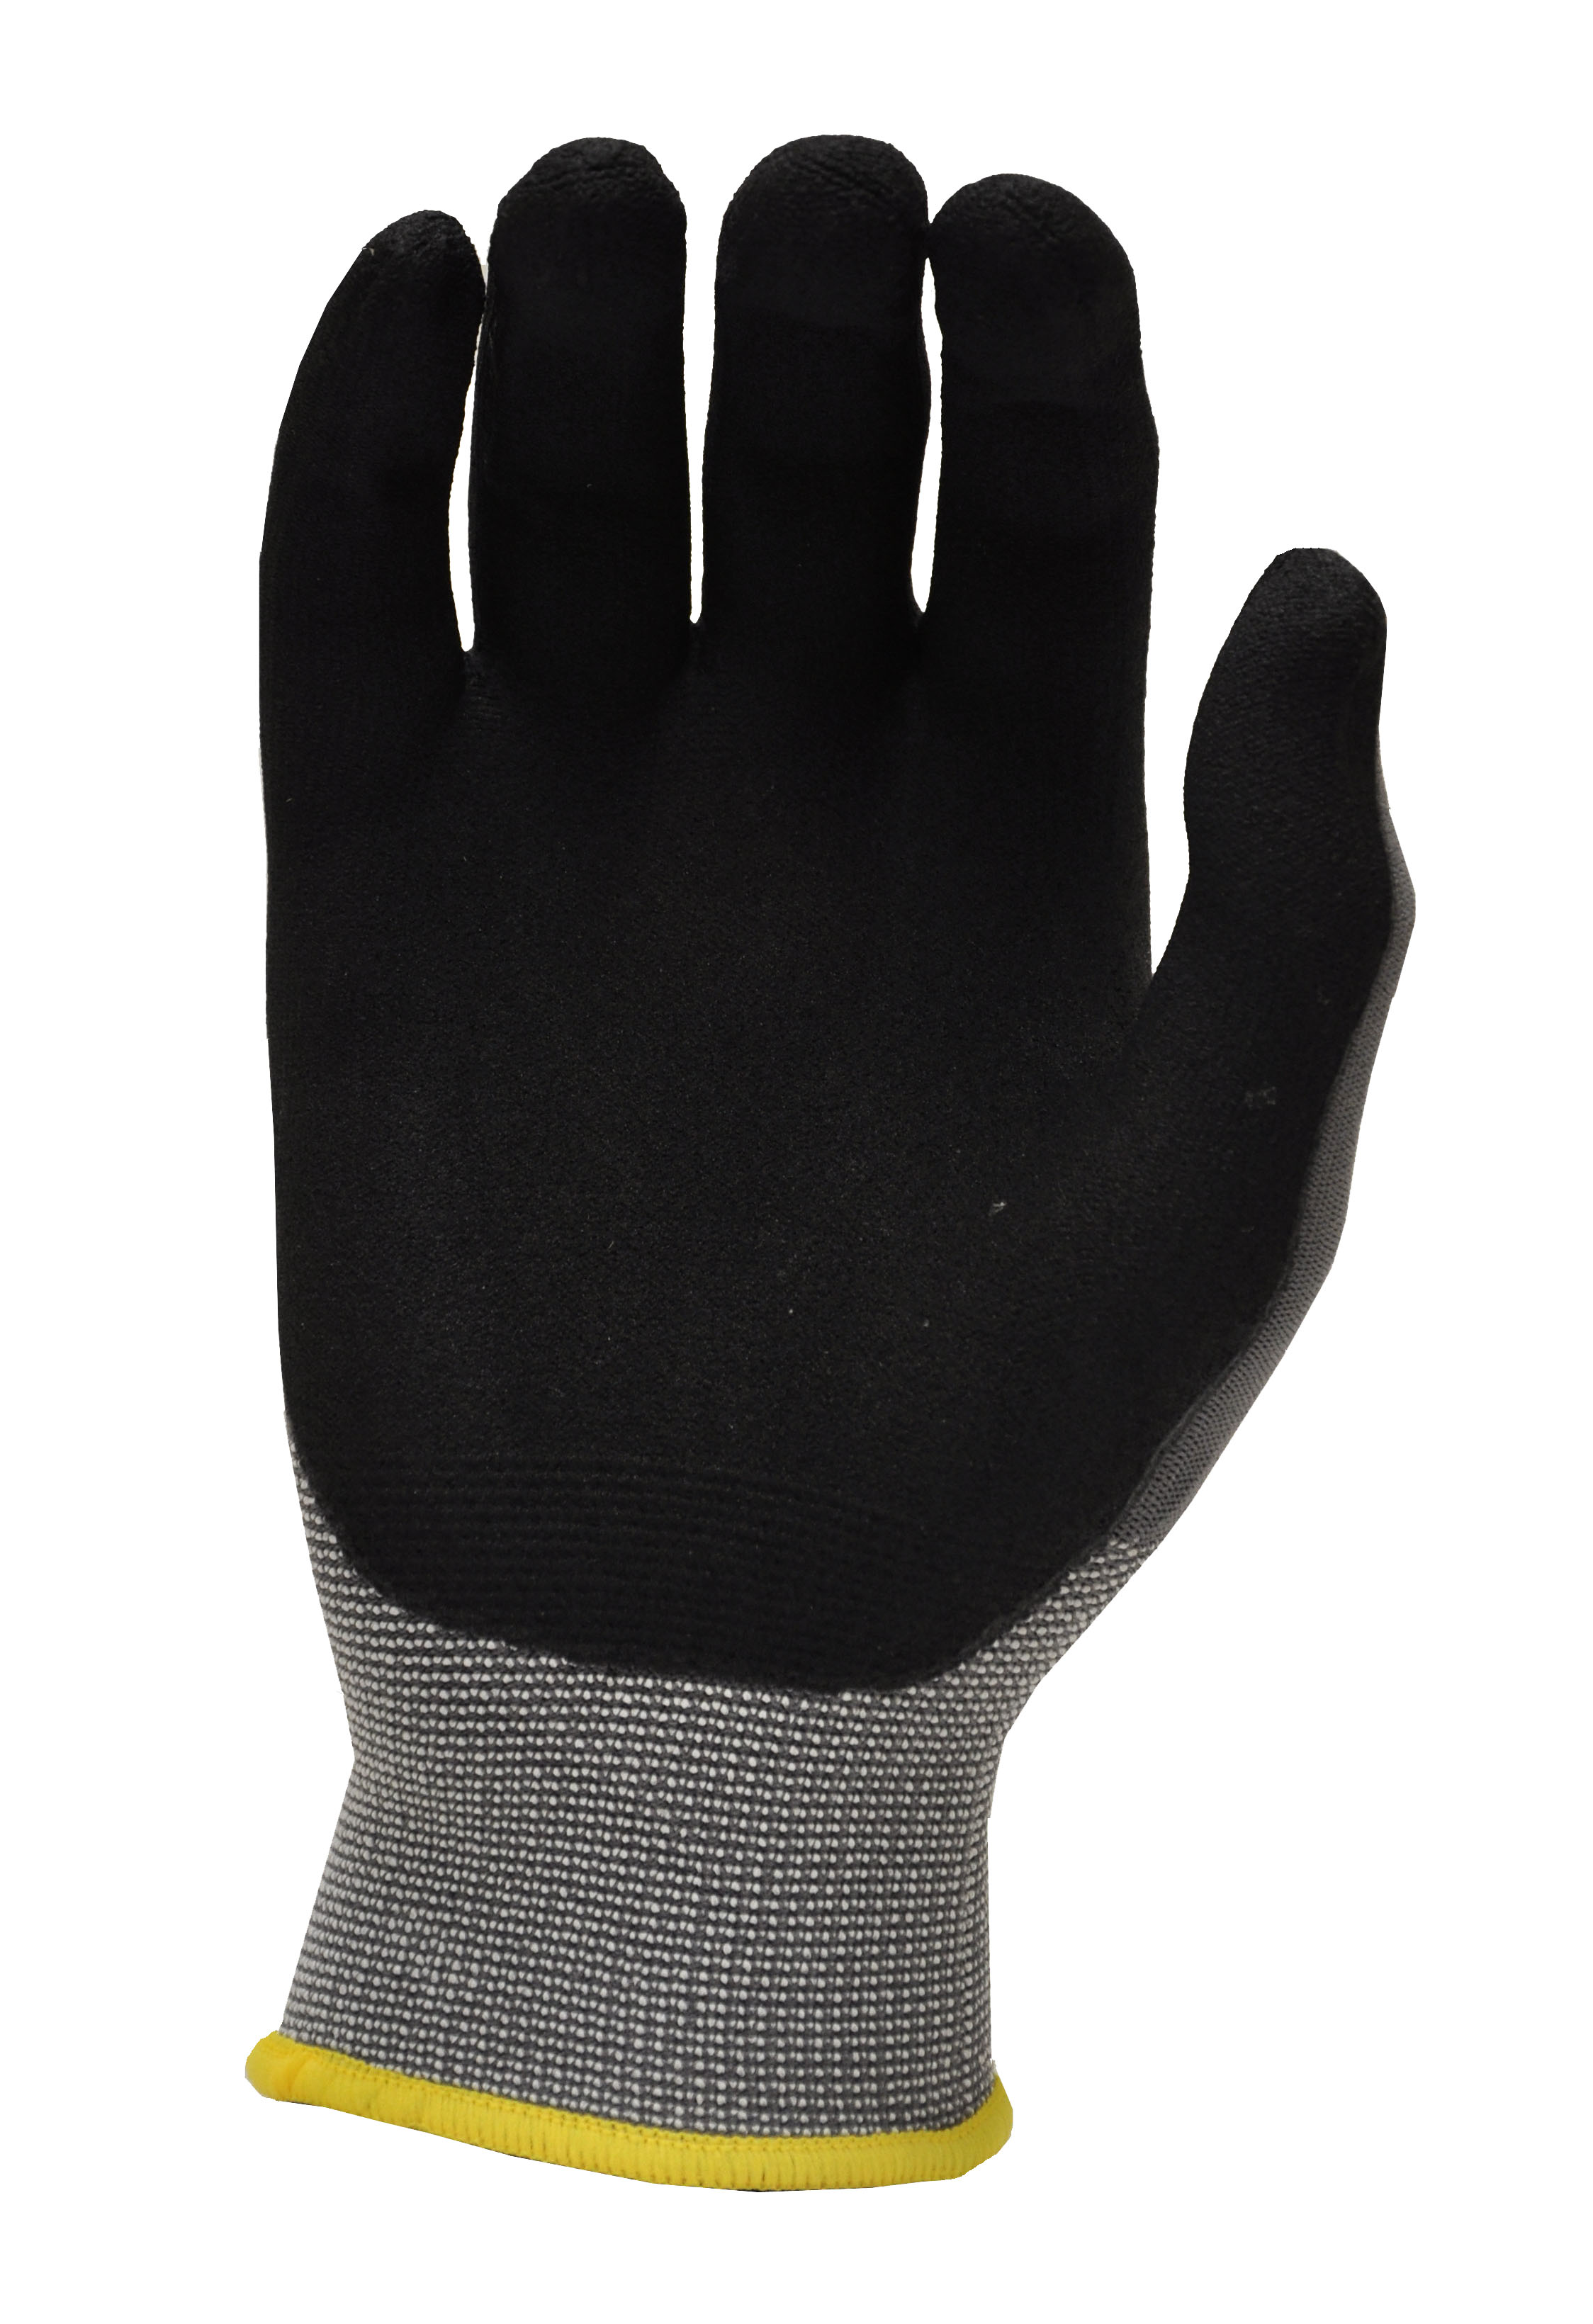 G & F Products Knit Nylon Gloves 1529L-12, Micro Form Nitrile Grip, 12 Pack, Large - image 3 of 7